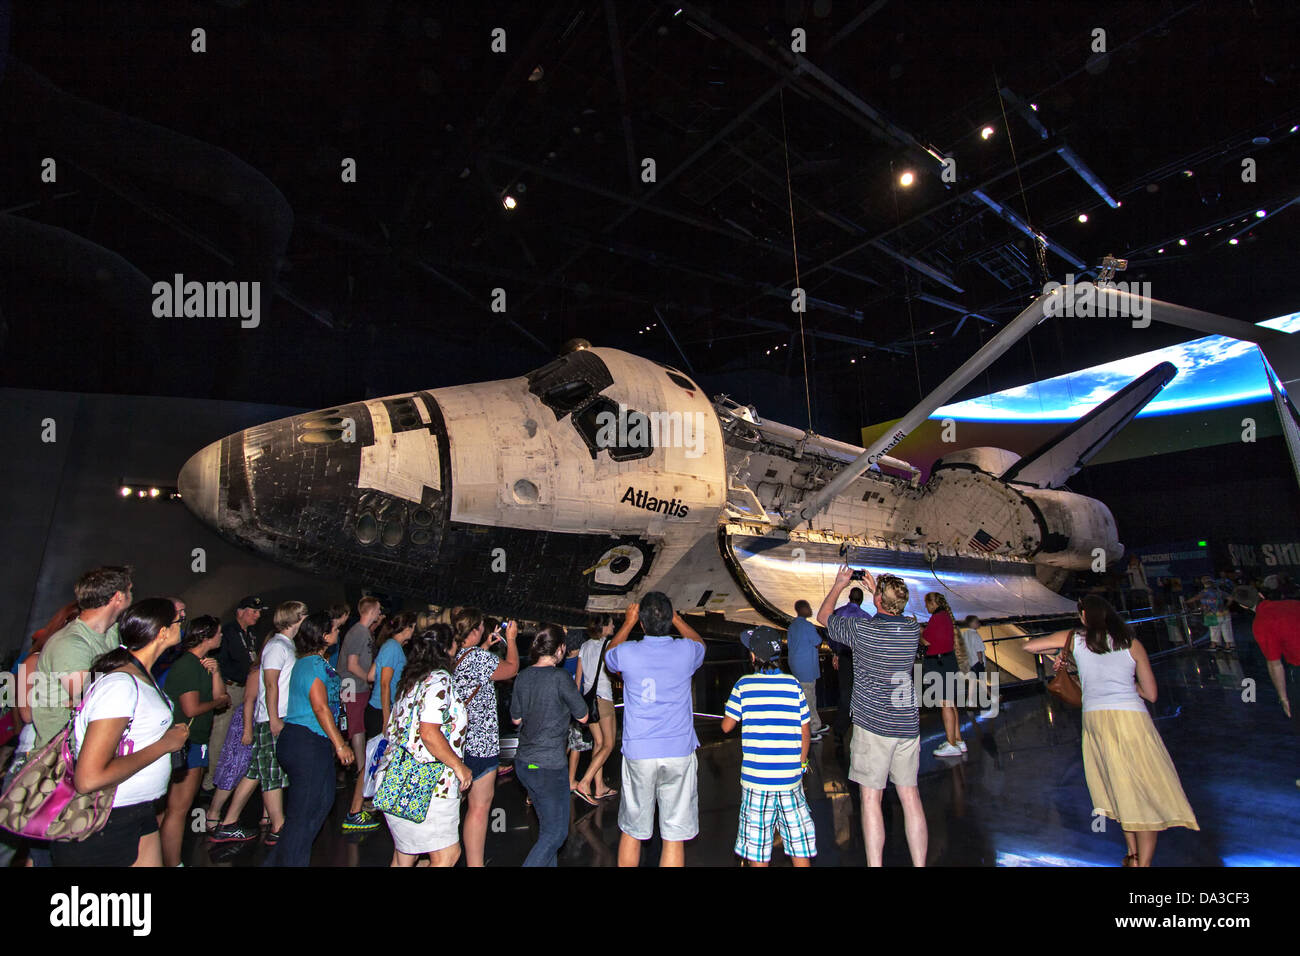 Visitors gather around the new Space Shuttle Atlantis facility at the Kennedy Space Center Visitor Complex June 29, 2013 in Cape Canaveral, Florida. The new $100 million facility includes interactive exhibits that tell the story of the 30-year Space Shuttle Program and highlight the future of space exploration. Stock Photo